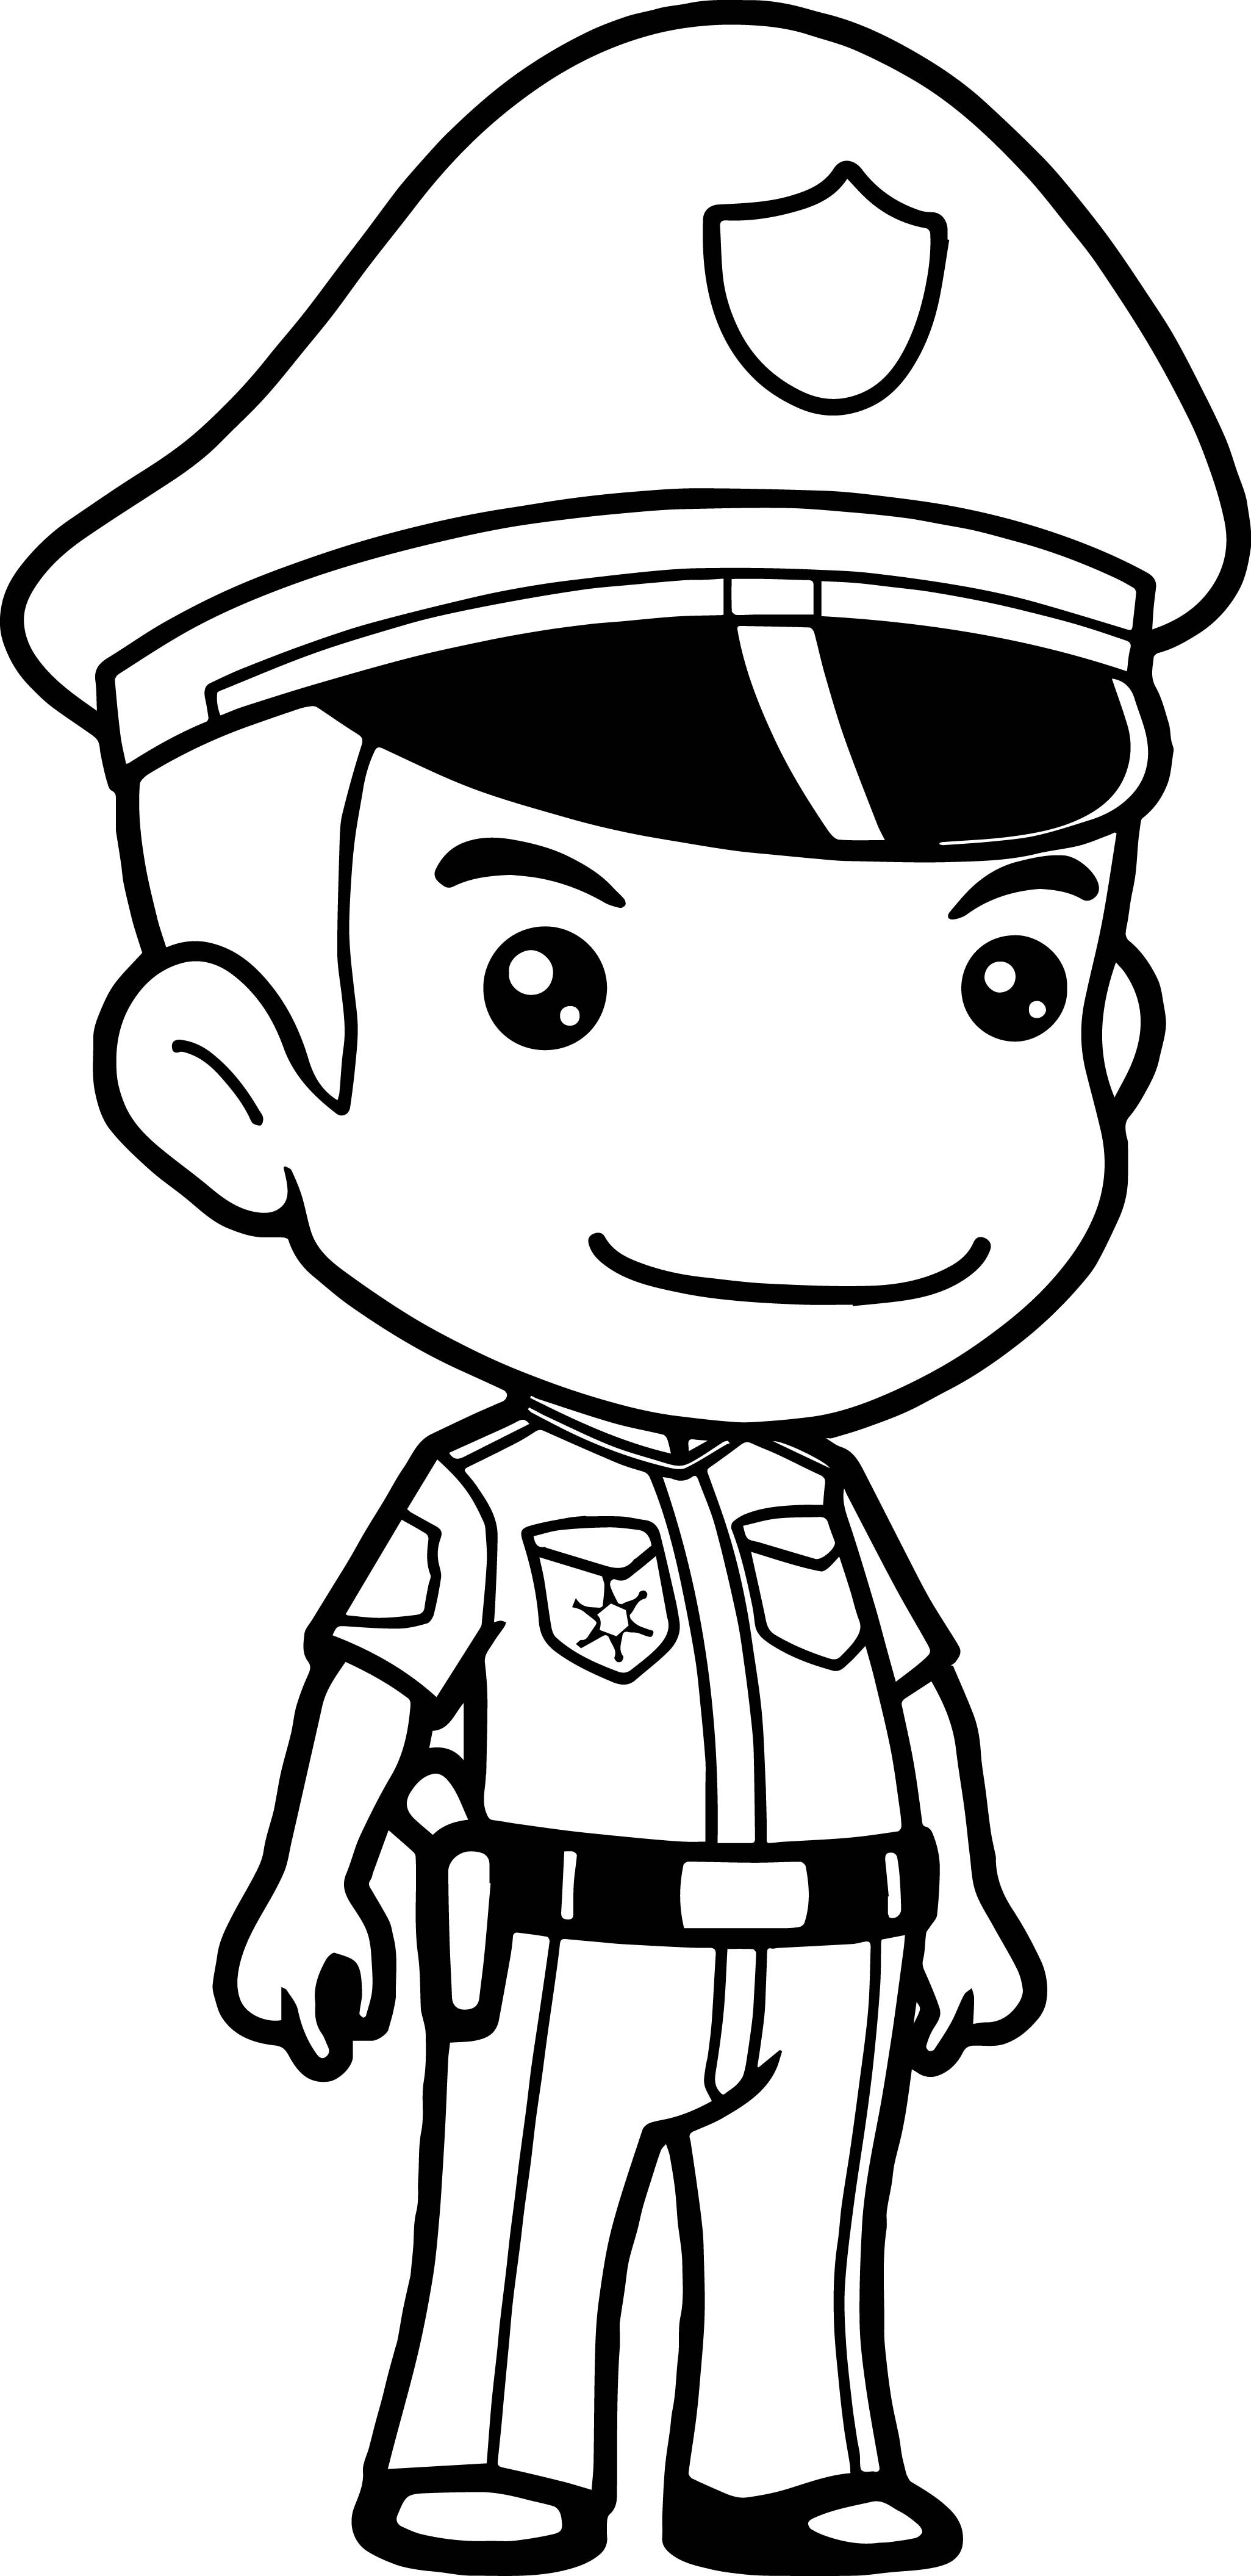 Police Officer Coloring Pages
 Anime Policeman Coloring Page